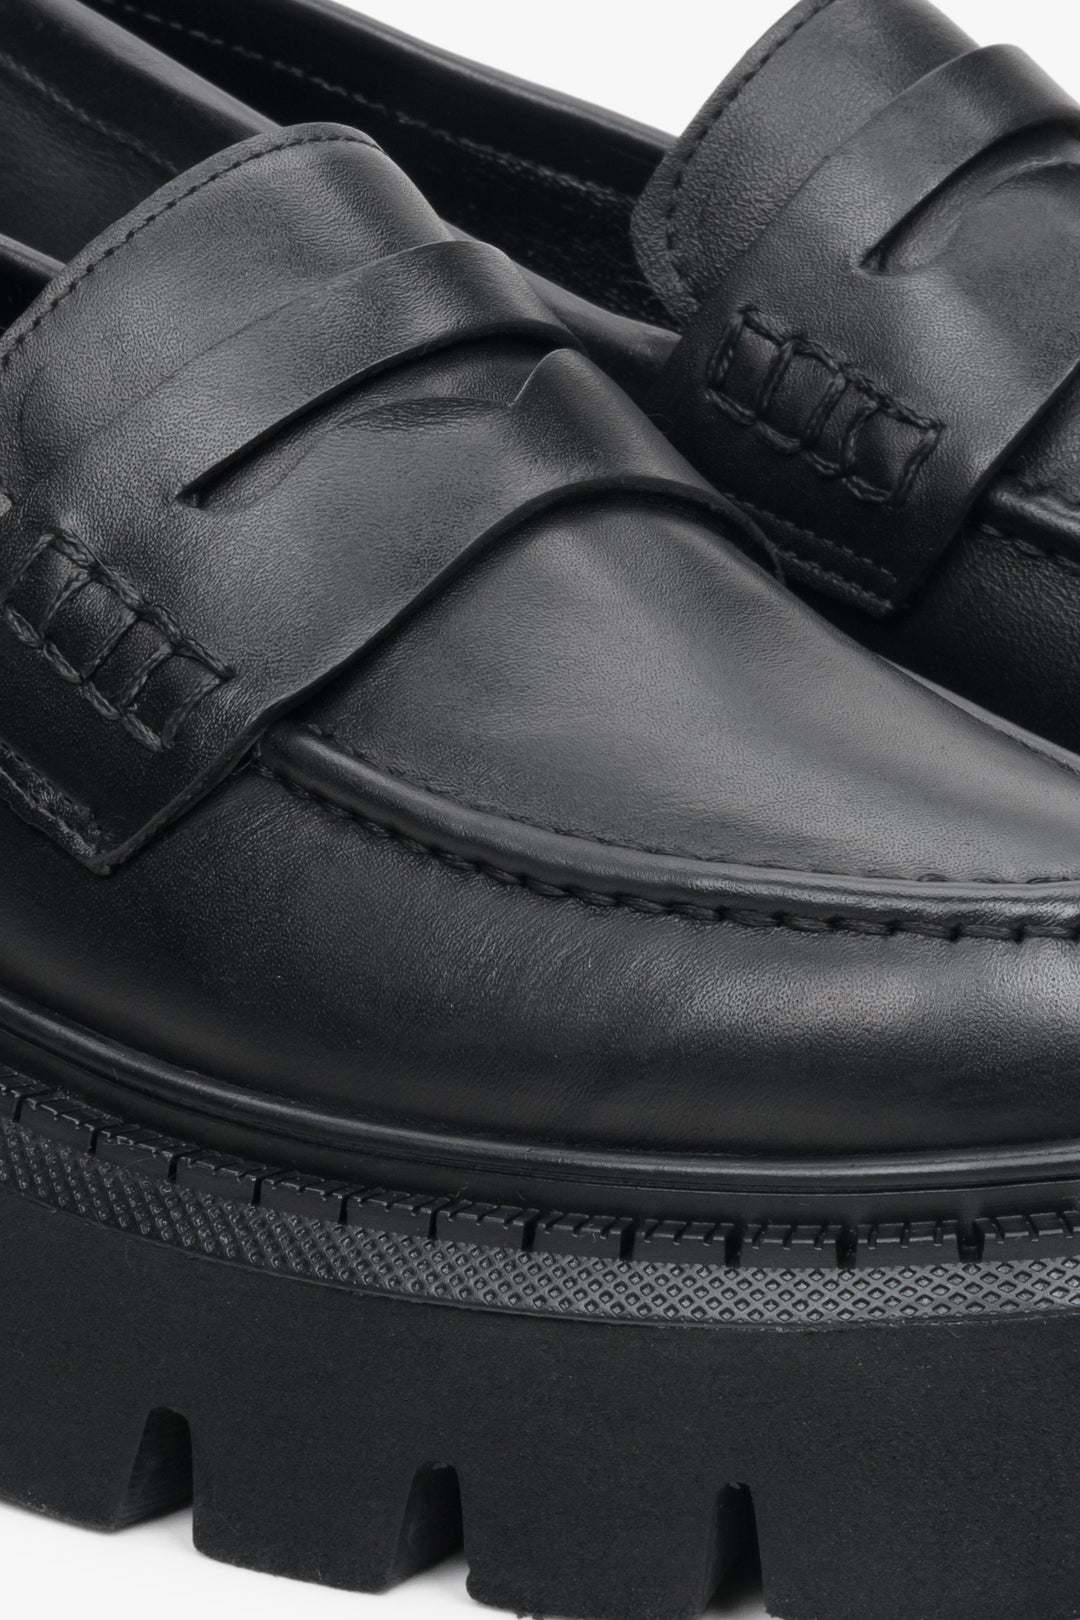 Women's, leather Estro loafers in black - close-up on the detail.